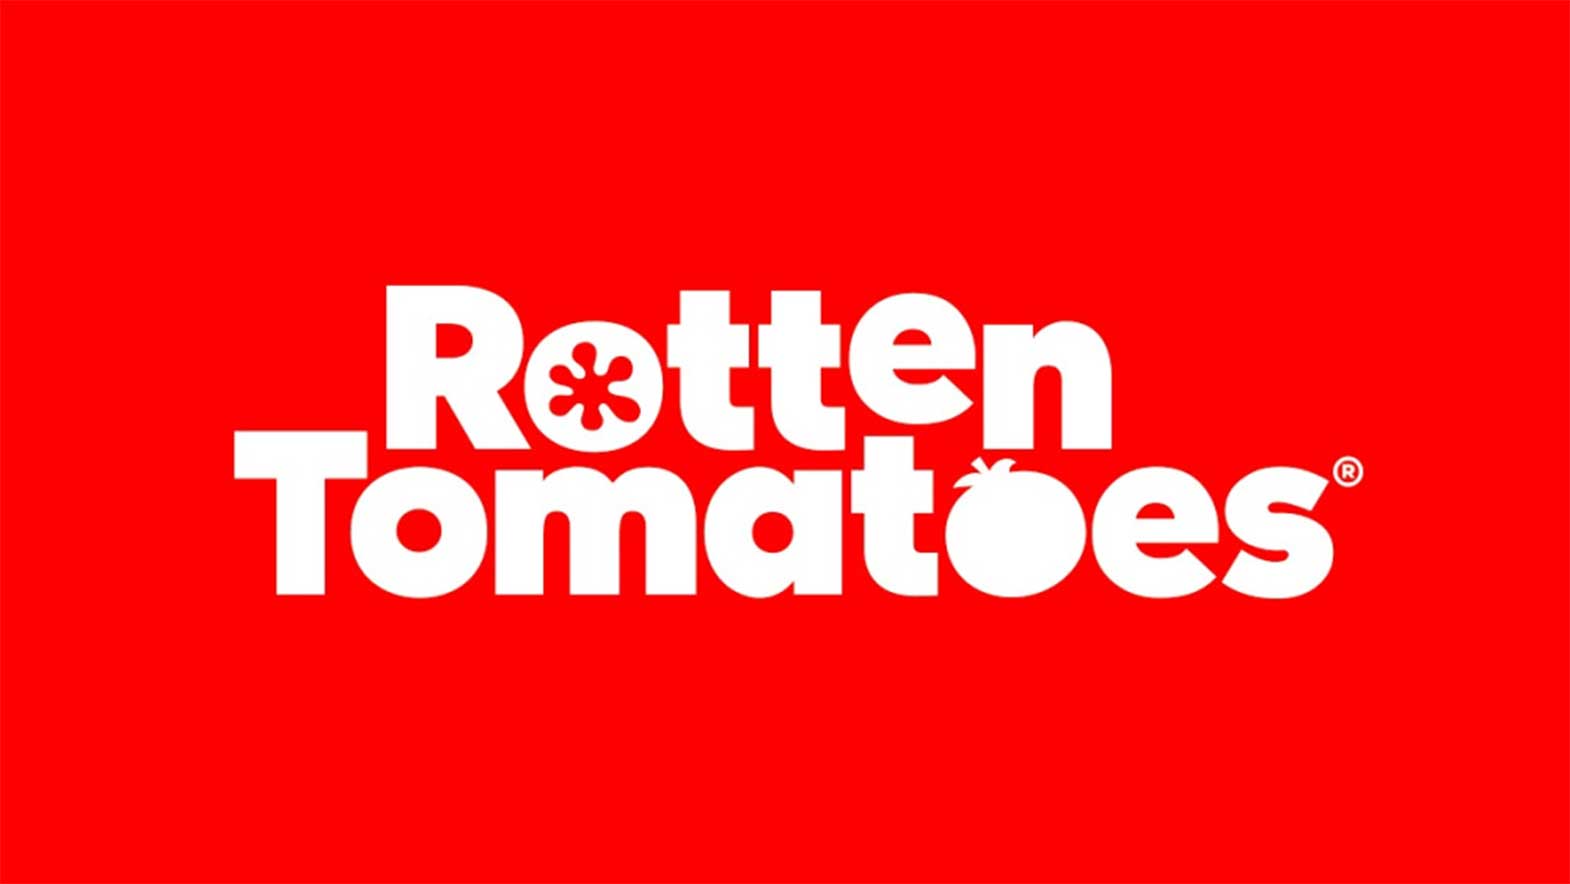 Review Aggregator 'Rotten Tomatoes' Set to Link Ticket Sales With Rating